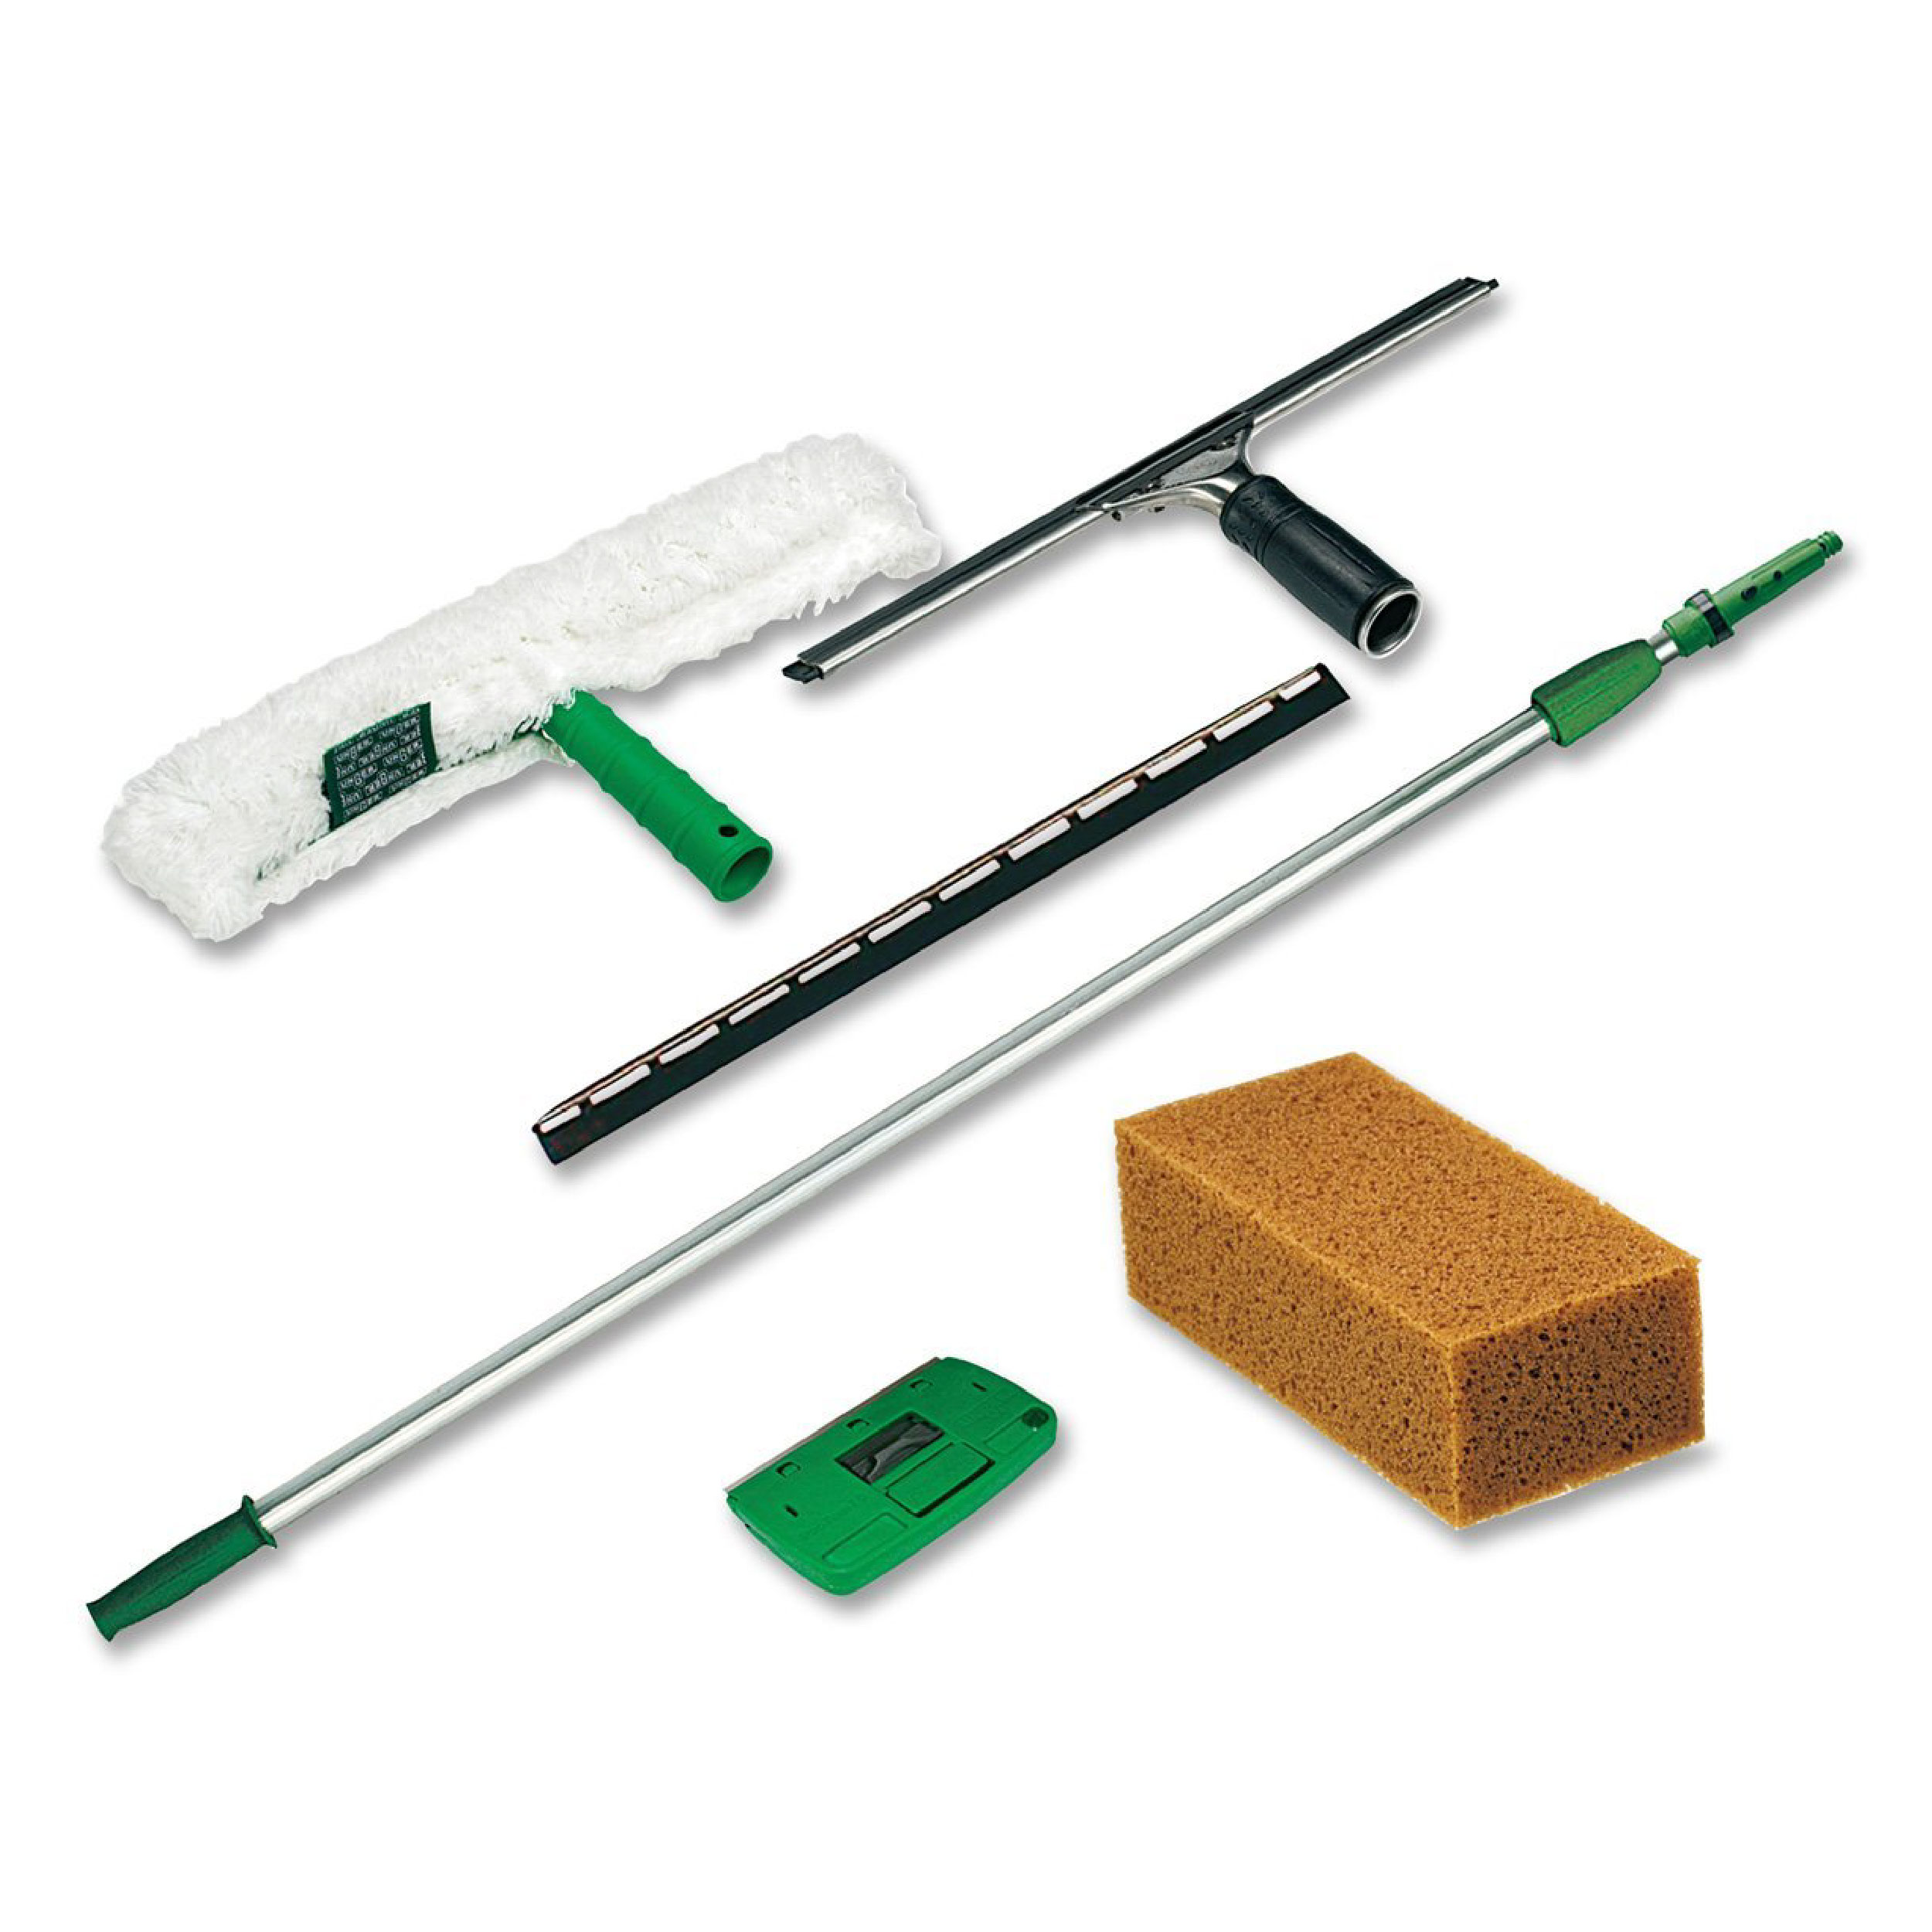 UNGER WINDOW CLEANING TOOLS – Klenco